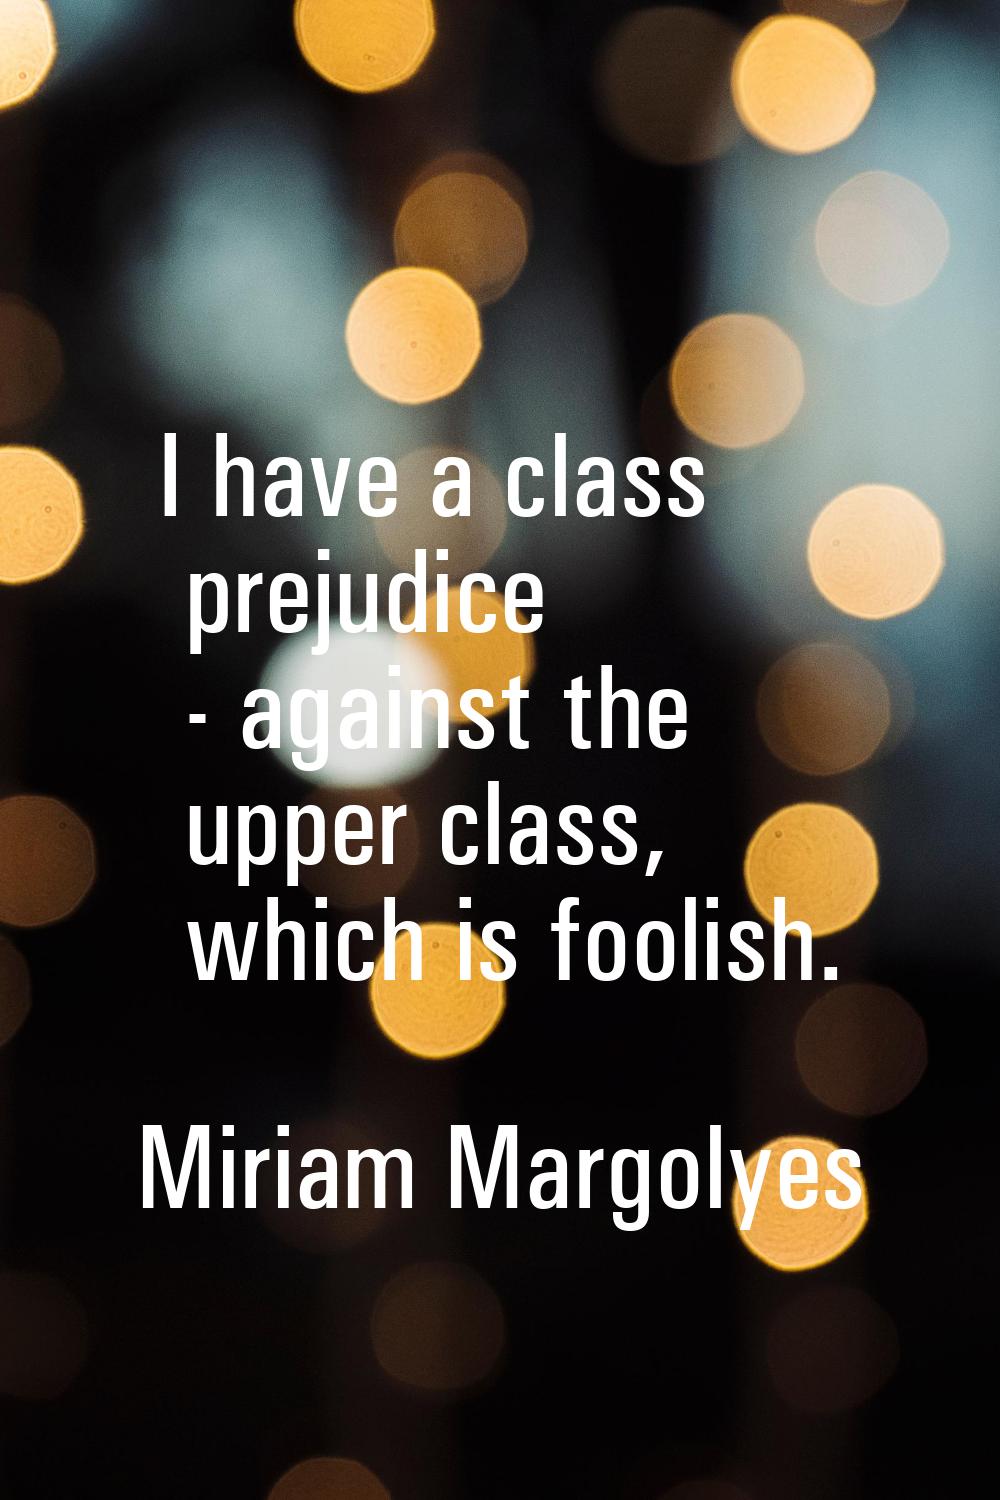 I have a class prejudice - against the upper class, which is foolish.